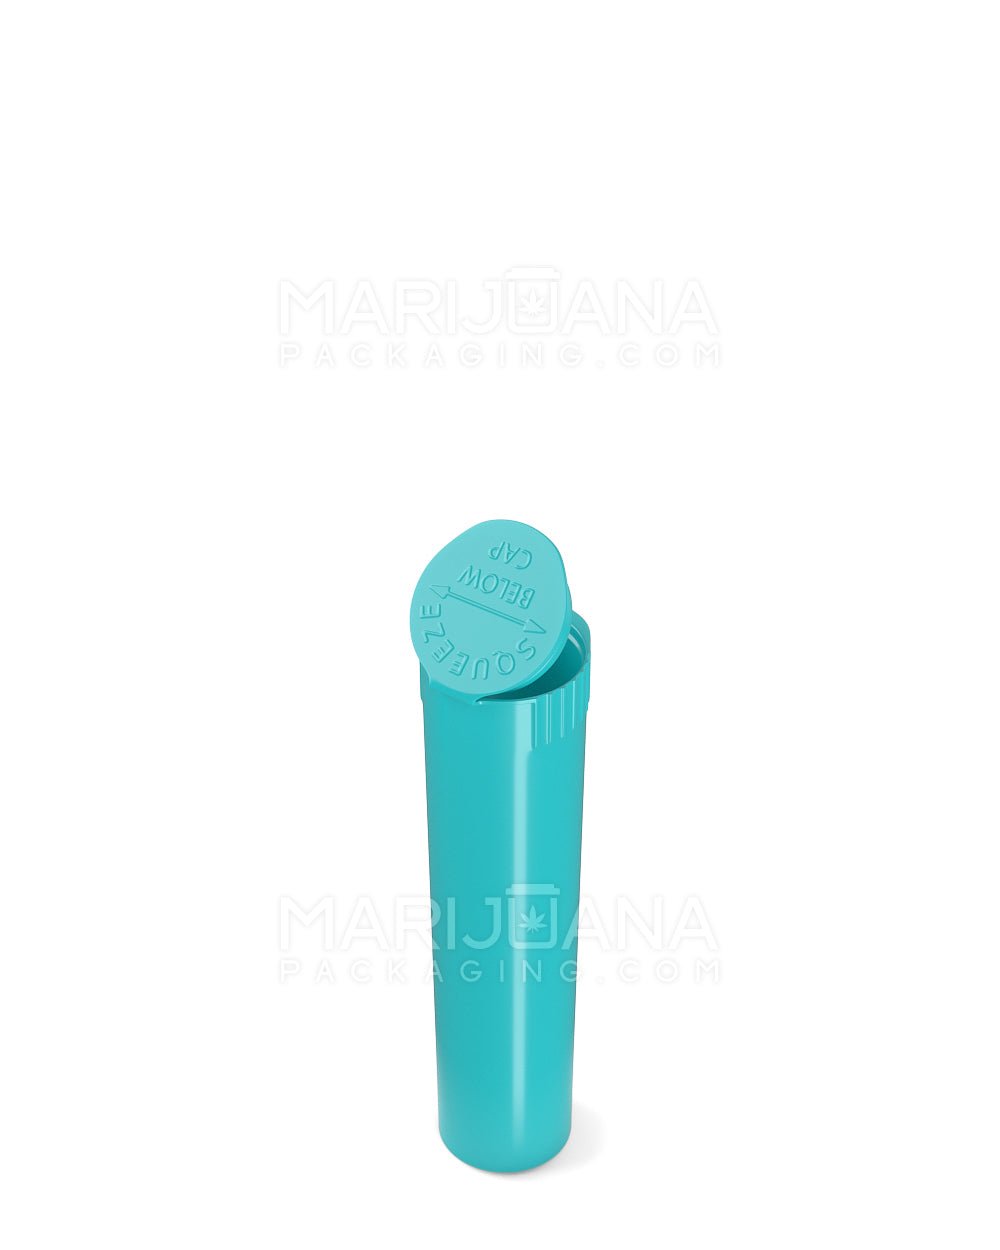 Child Resistant | 1 1/4 Size Pop Top Opaque Plastic Pre-Roll Tubes | 84mm - Teal - 1000 Count - 6